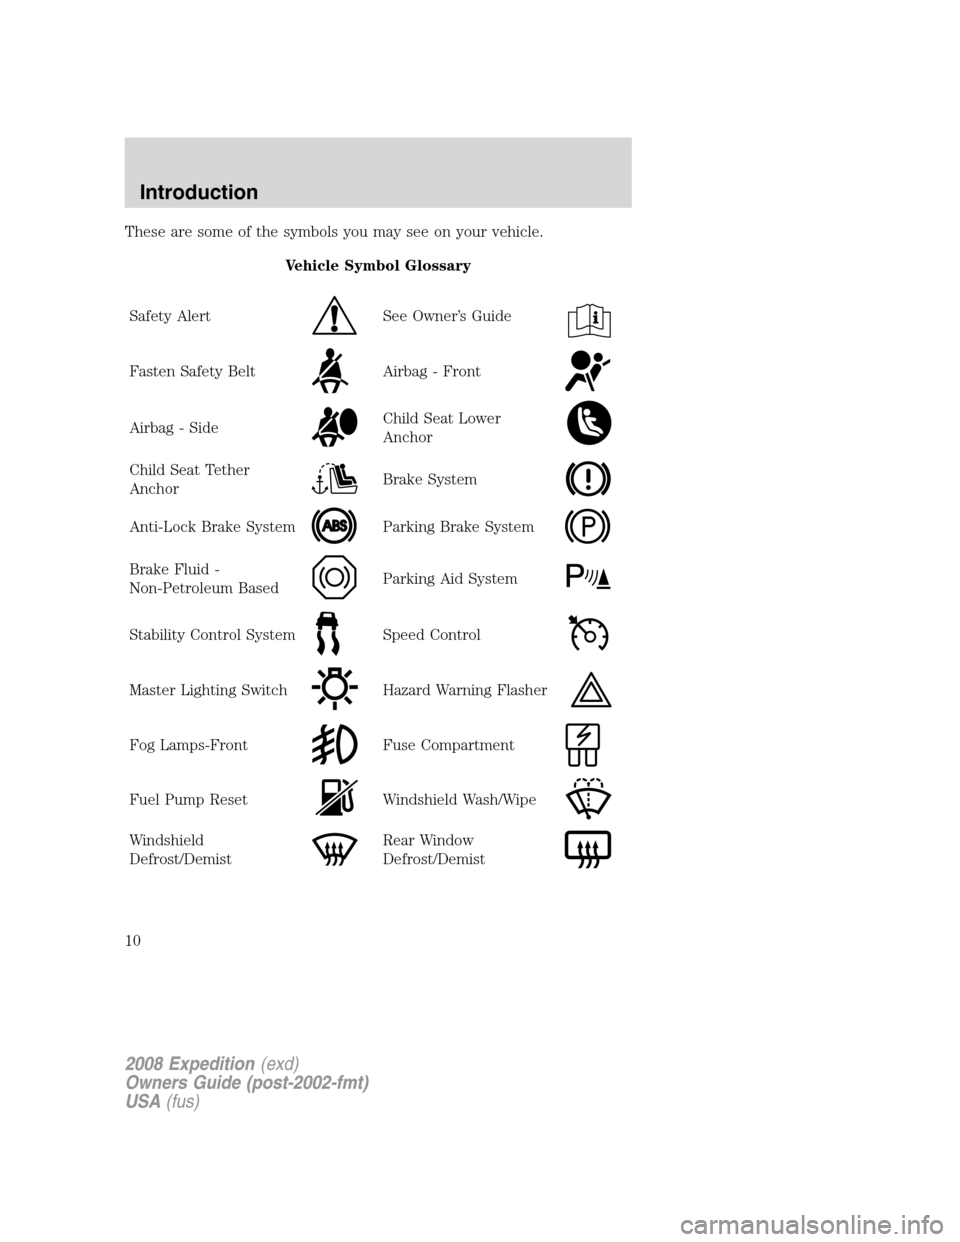 FORD EXPEDITION 2008 3.G Owners Manual These are some of the symbols you may see on your vehicle.
Vehicle Symbol Glossary
Safety Alert
See Owner’s Guide
Fasten Safety BeltAirbag - Front
Airbag - SideChild Seat Lower
Anchor
Child Seat Tet